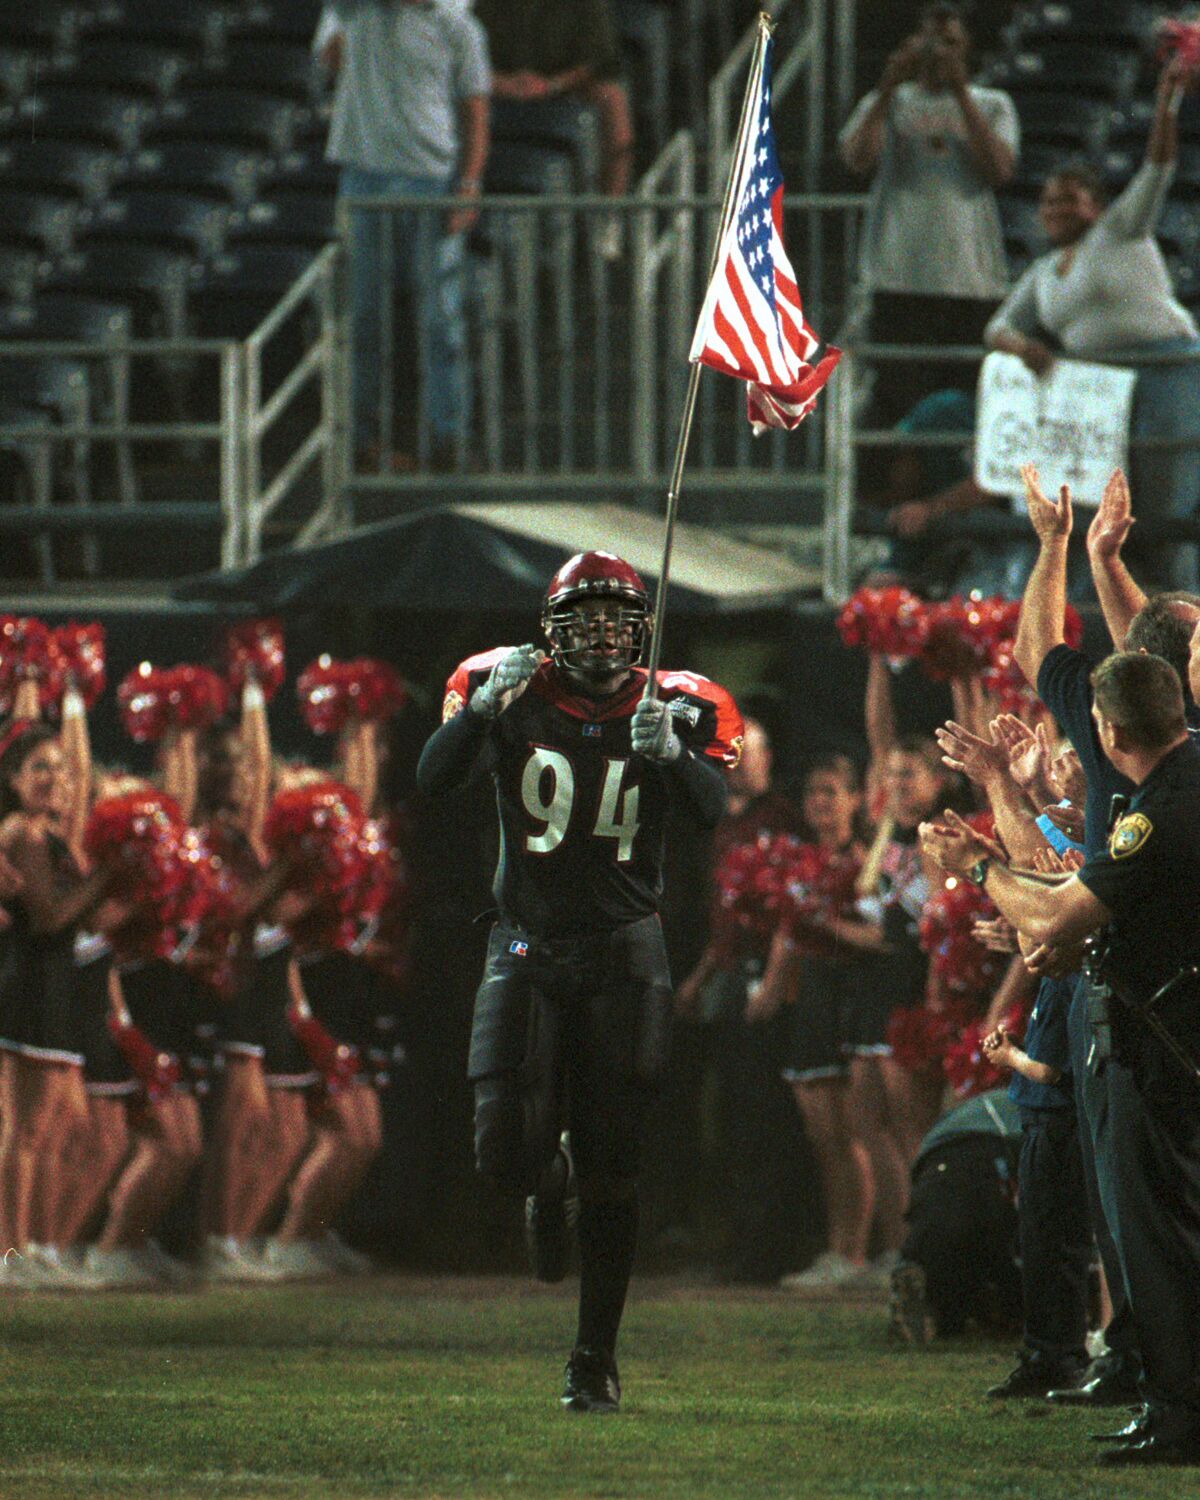 Emotions were high for the Aztecs' first home game after the Sept.  11, 2001 terror attacks. 